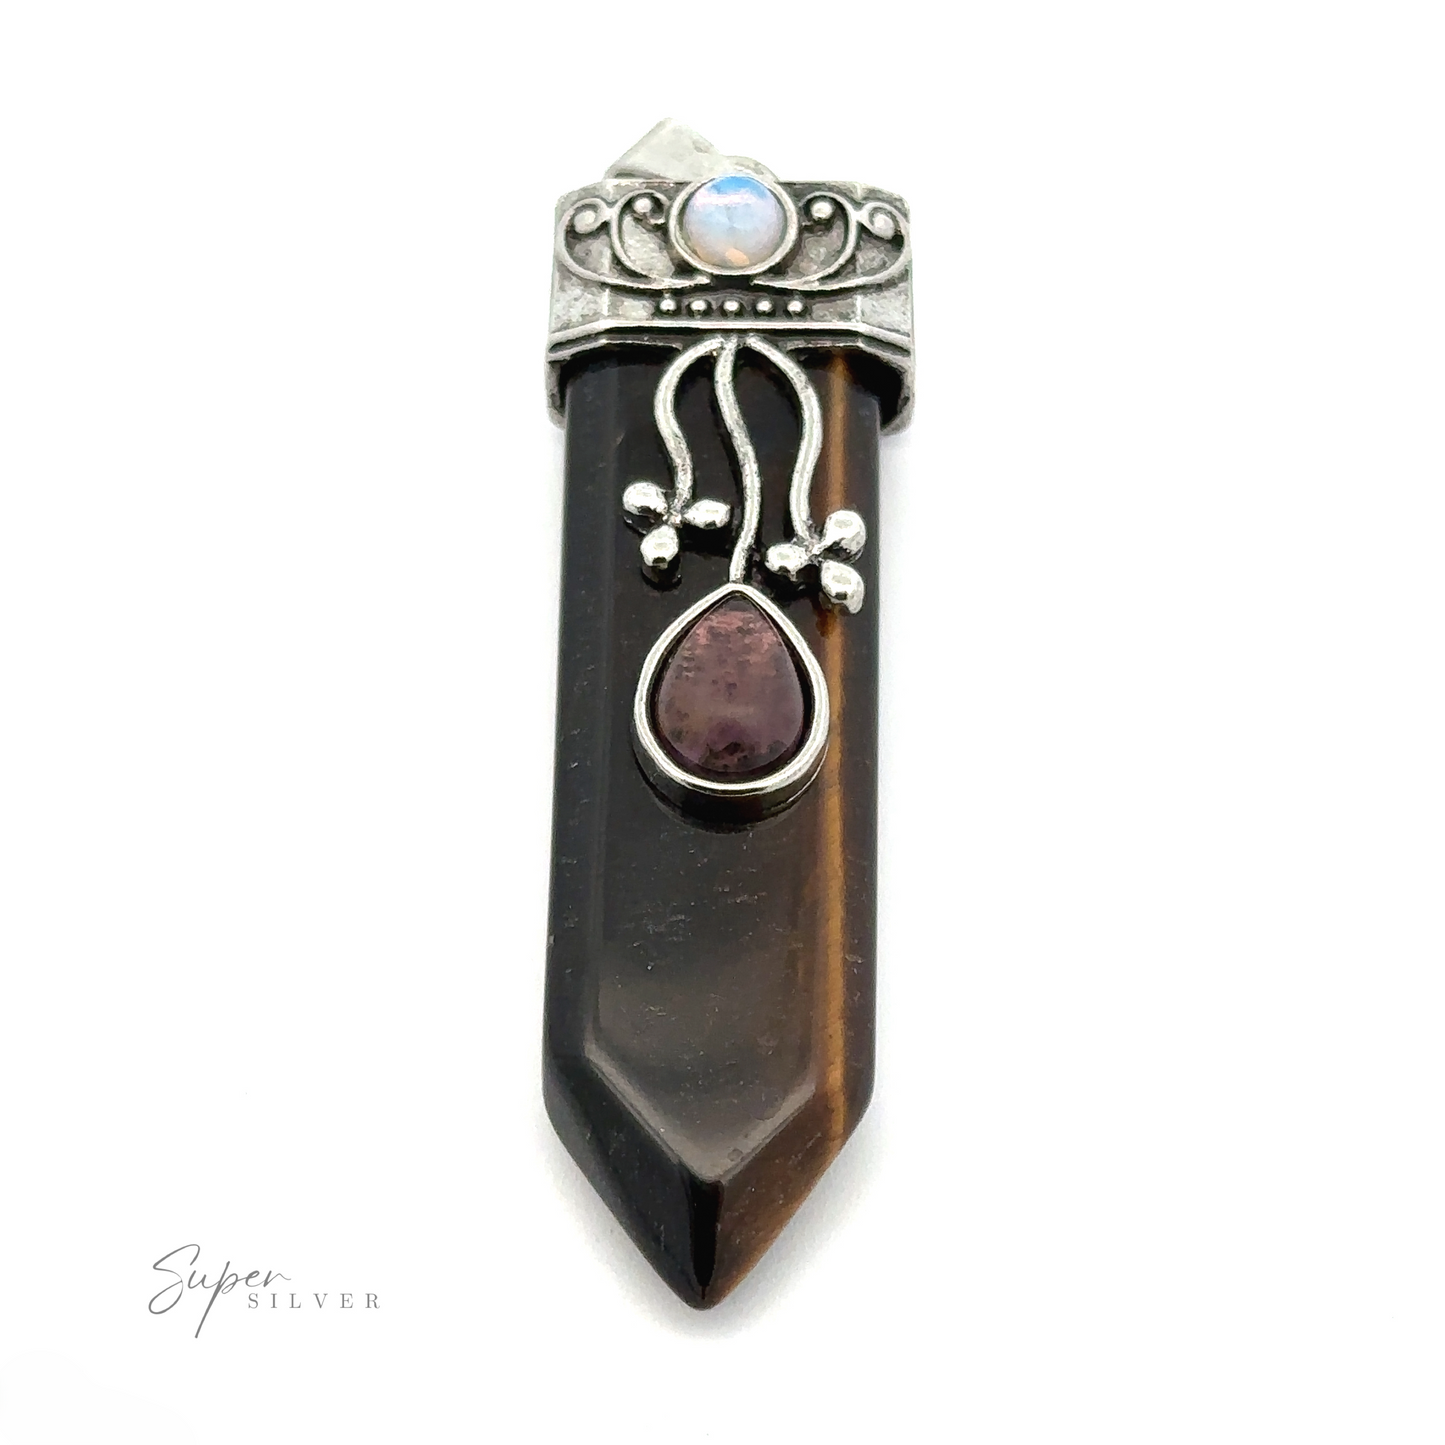 
                  
                    A boho Obelisk Crystal Stone Pendant featuring a brown gemstone point, ornate silver detailing, and a small round opal at the top. An amethyst teardrop-shaped gem decorates the center. The brand "Super Silver" is visible.
                  
                